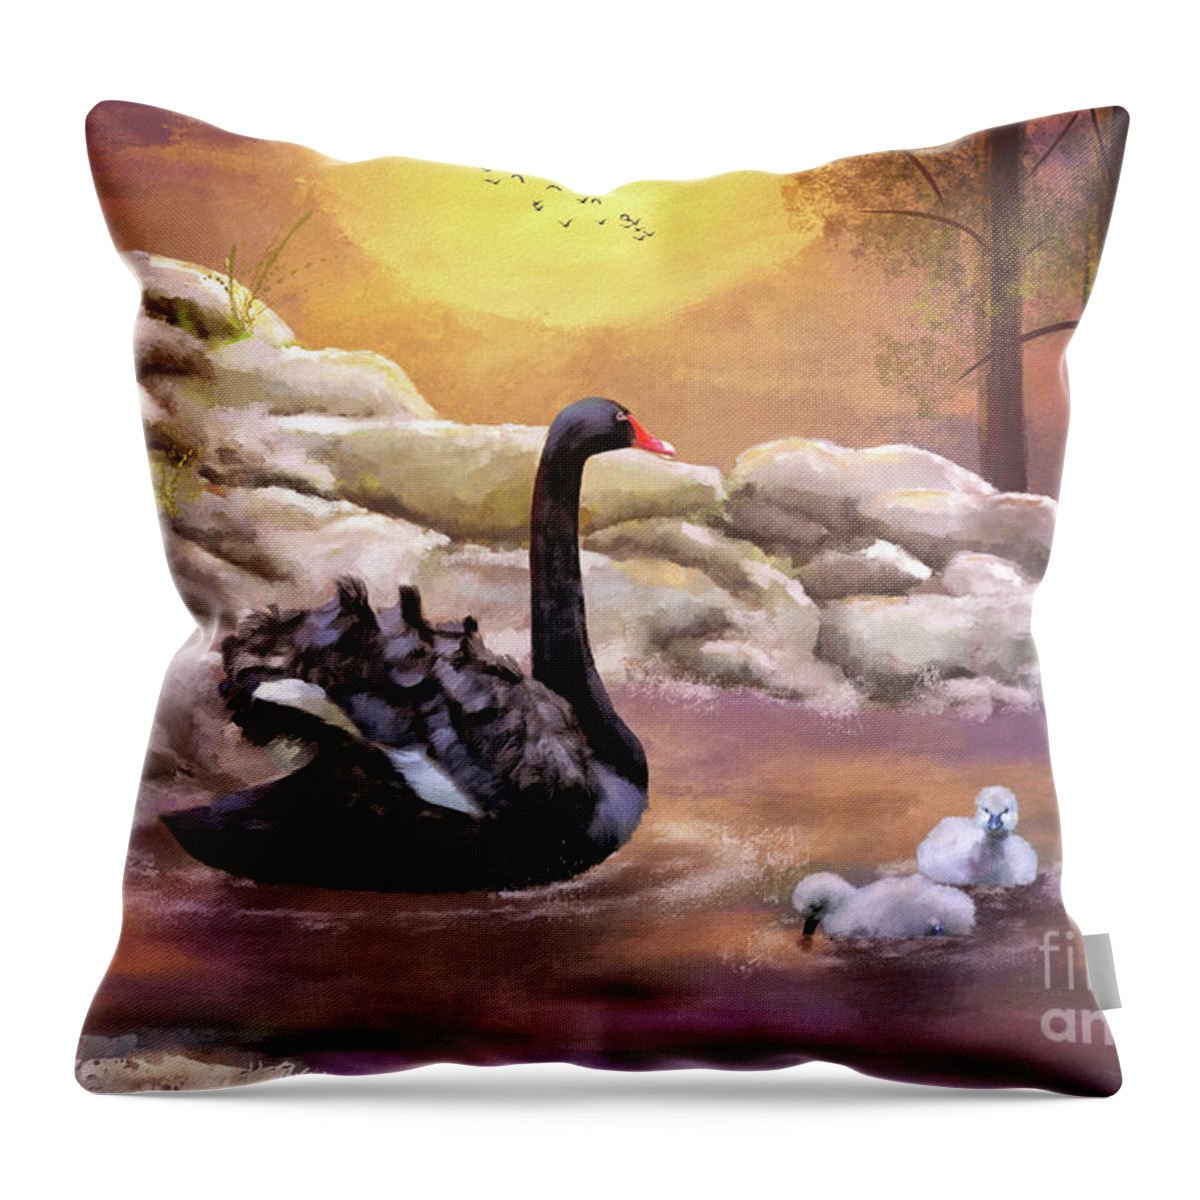 Swan Throw Pillow featuring the digital art Swans Swimming At Sunset by Lois Bryan